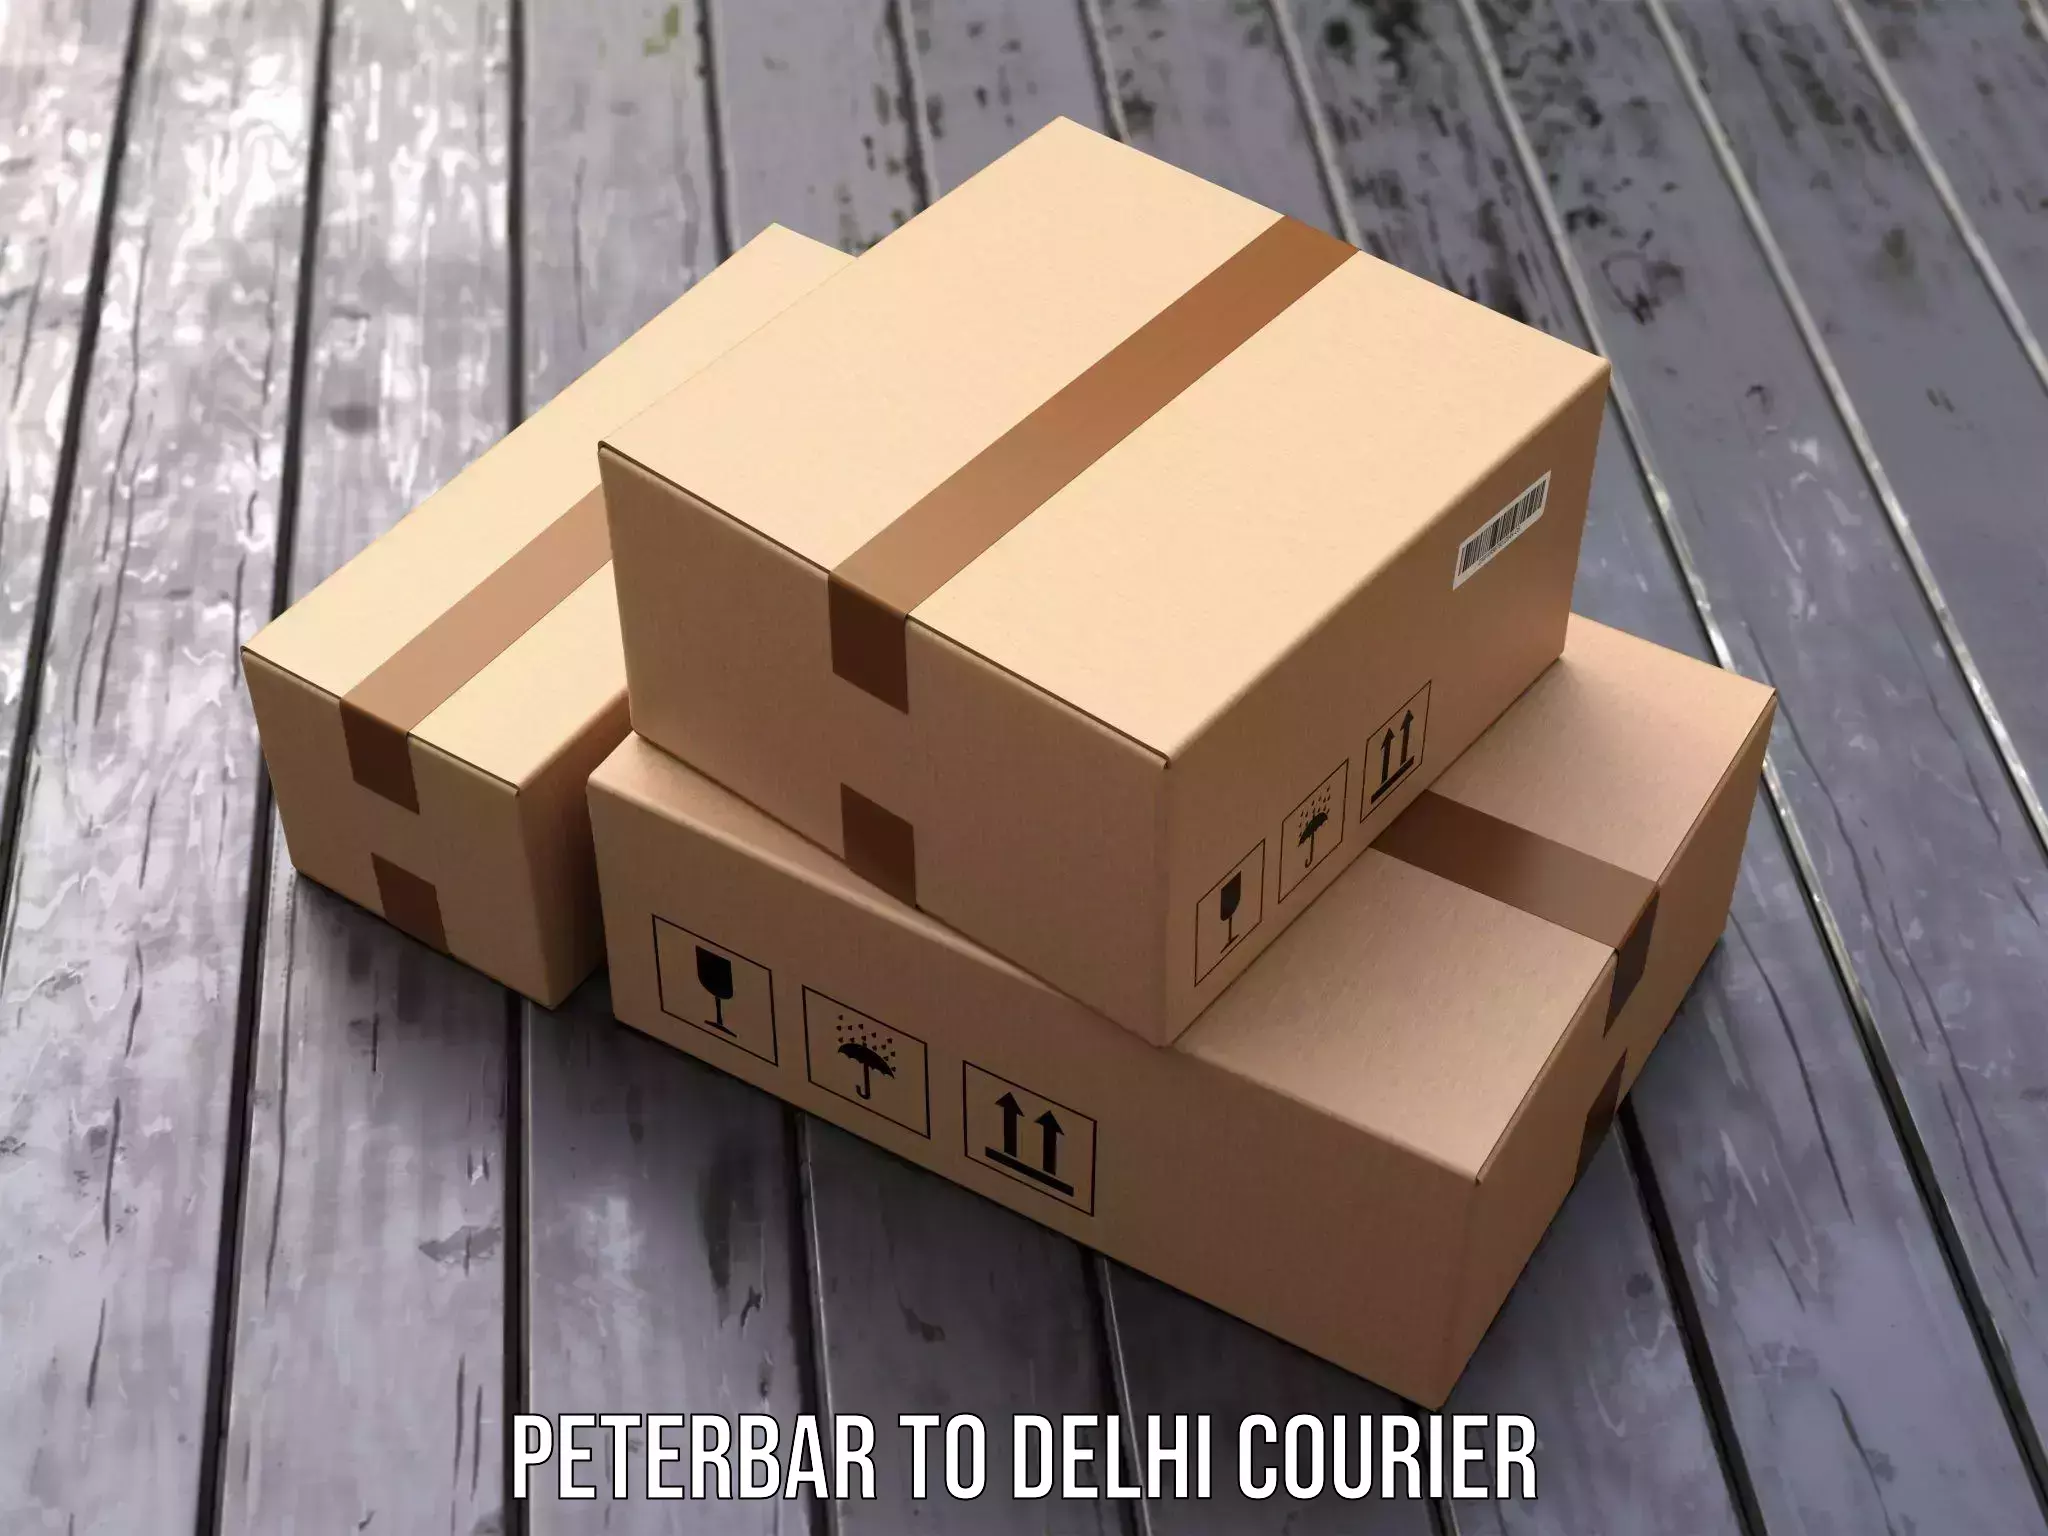 Quality courier partnerships Peterbar to Delhi